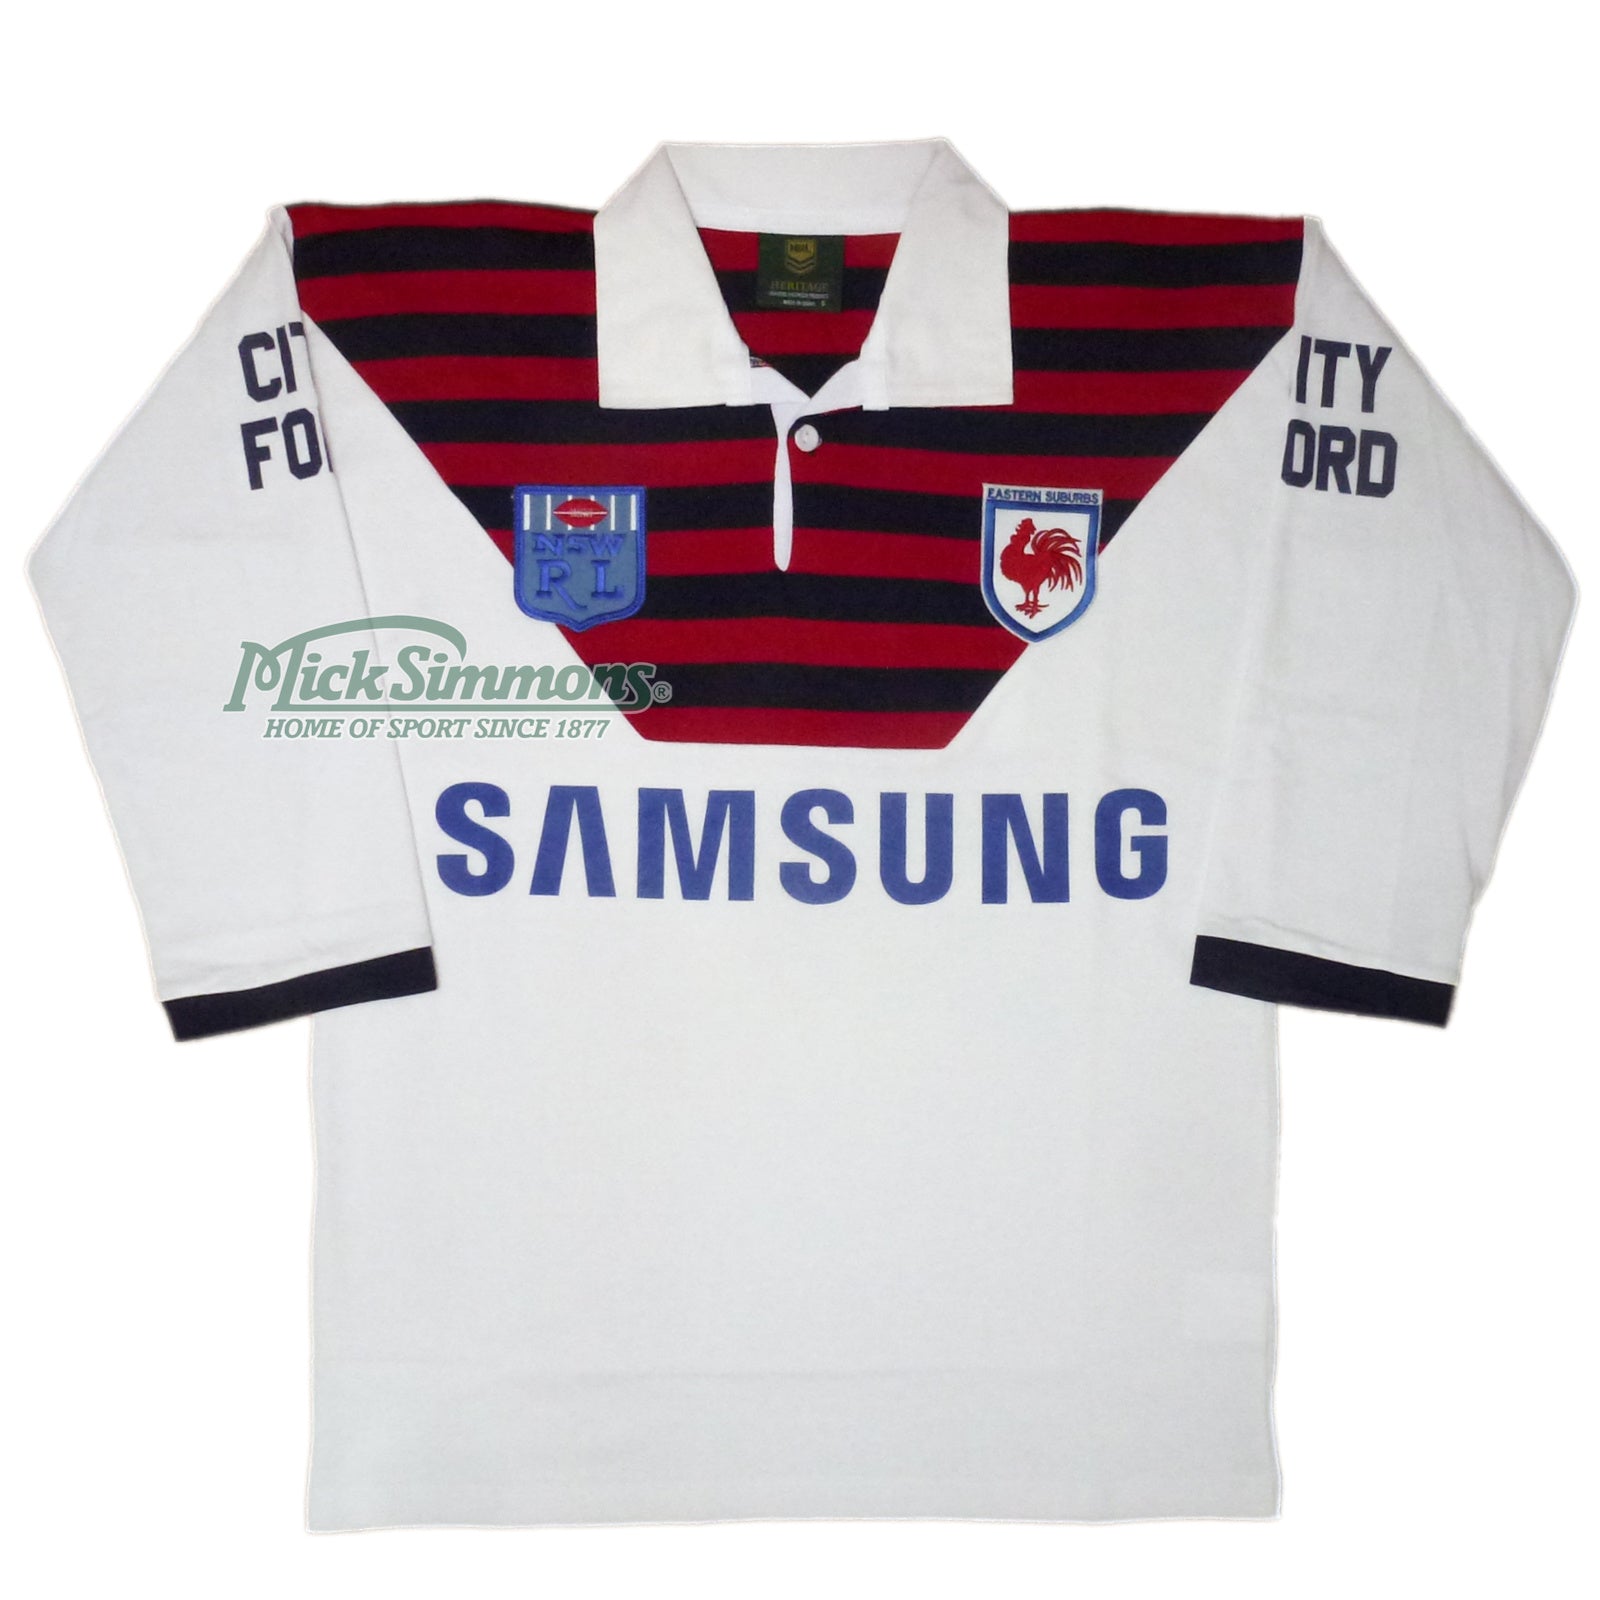 Classic Rugby Shirts  1996 Chiefs Vintage Old Jerseys